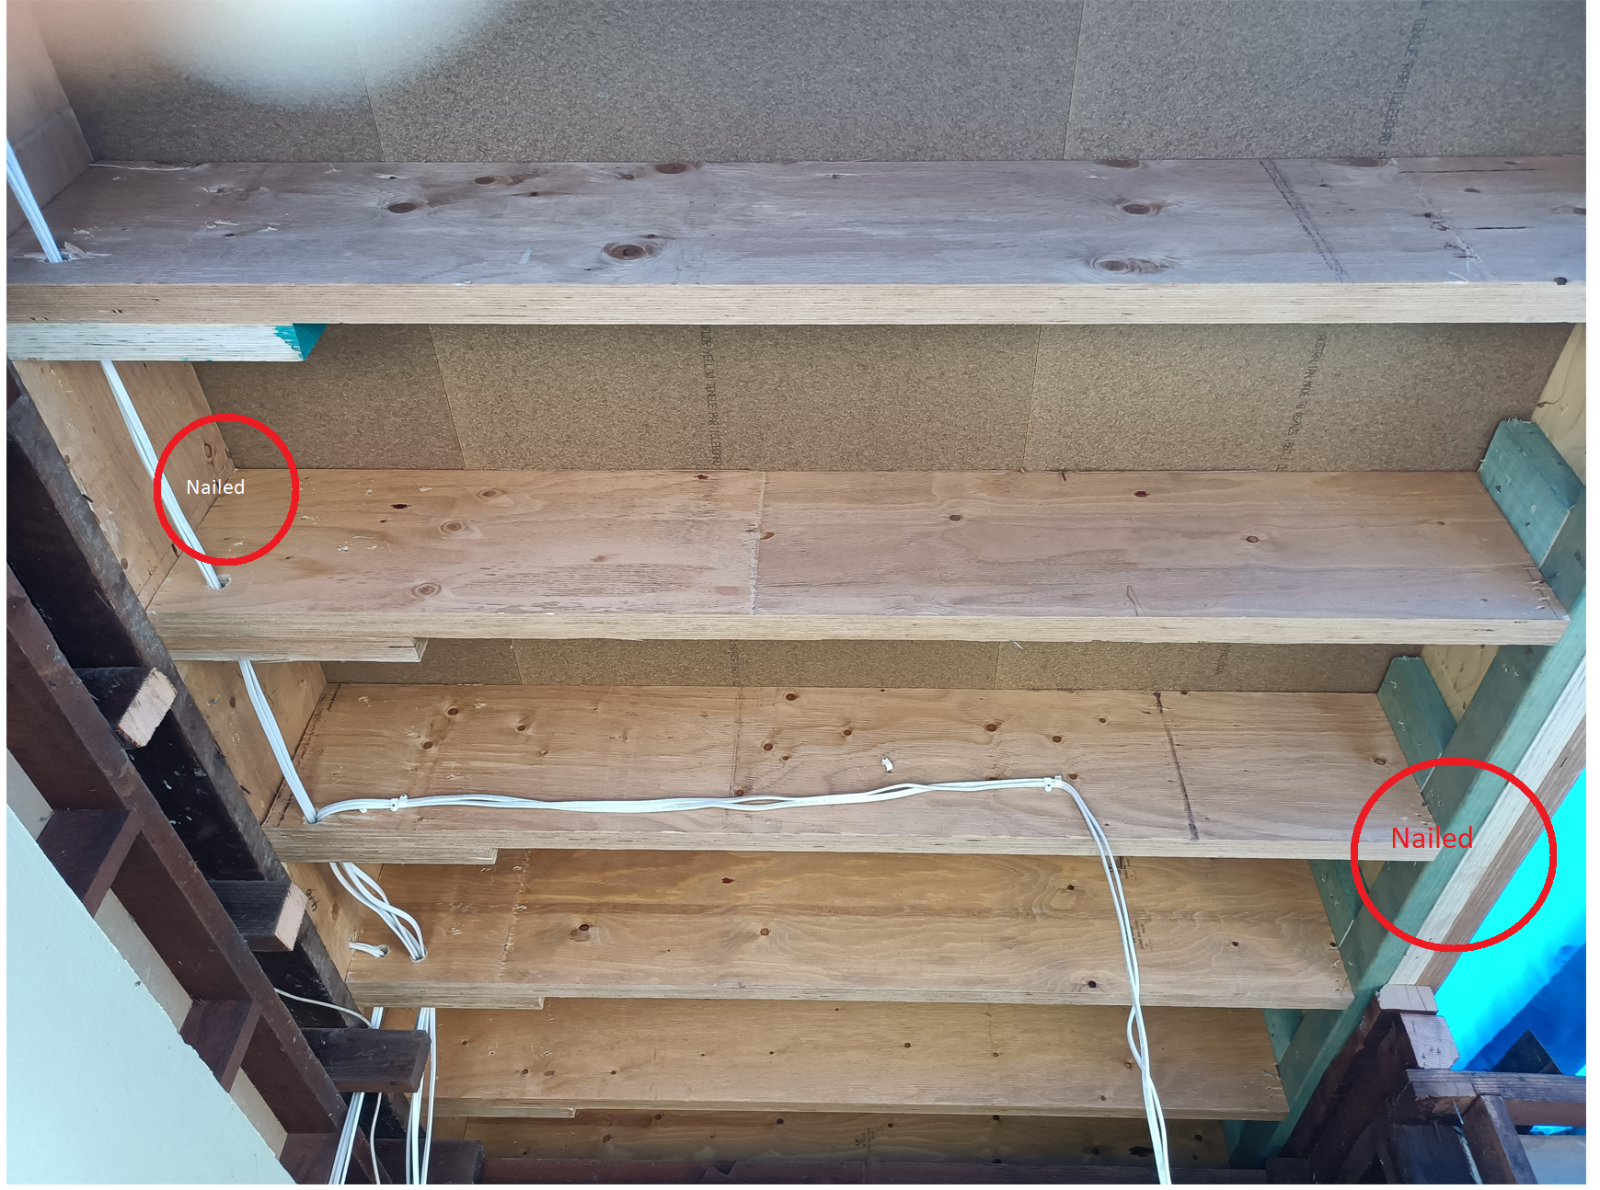 Reno Concern - Only Nails to connect floor joists to beam